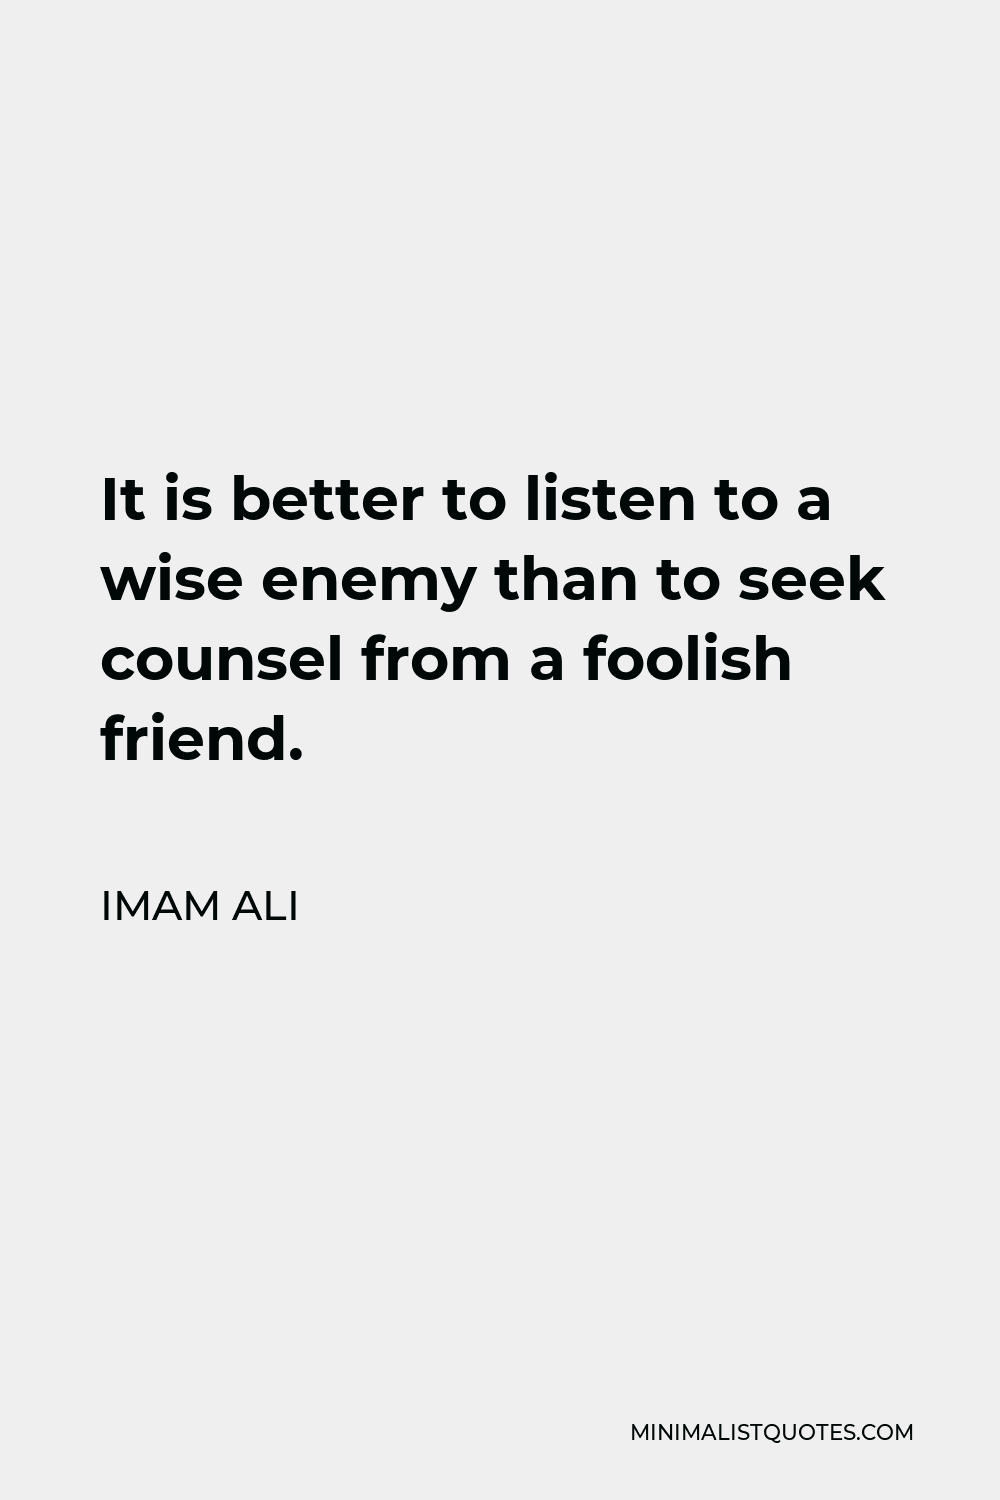 Imam Ali Quote - It is better to listen to a wise enemy than to seek counsel from a foolish friend.